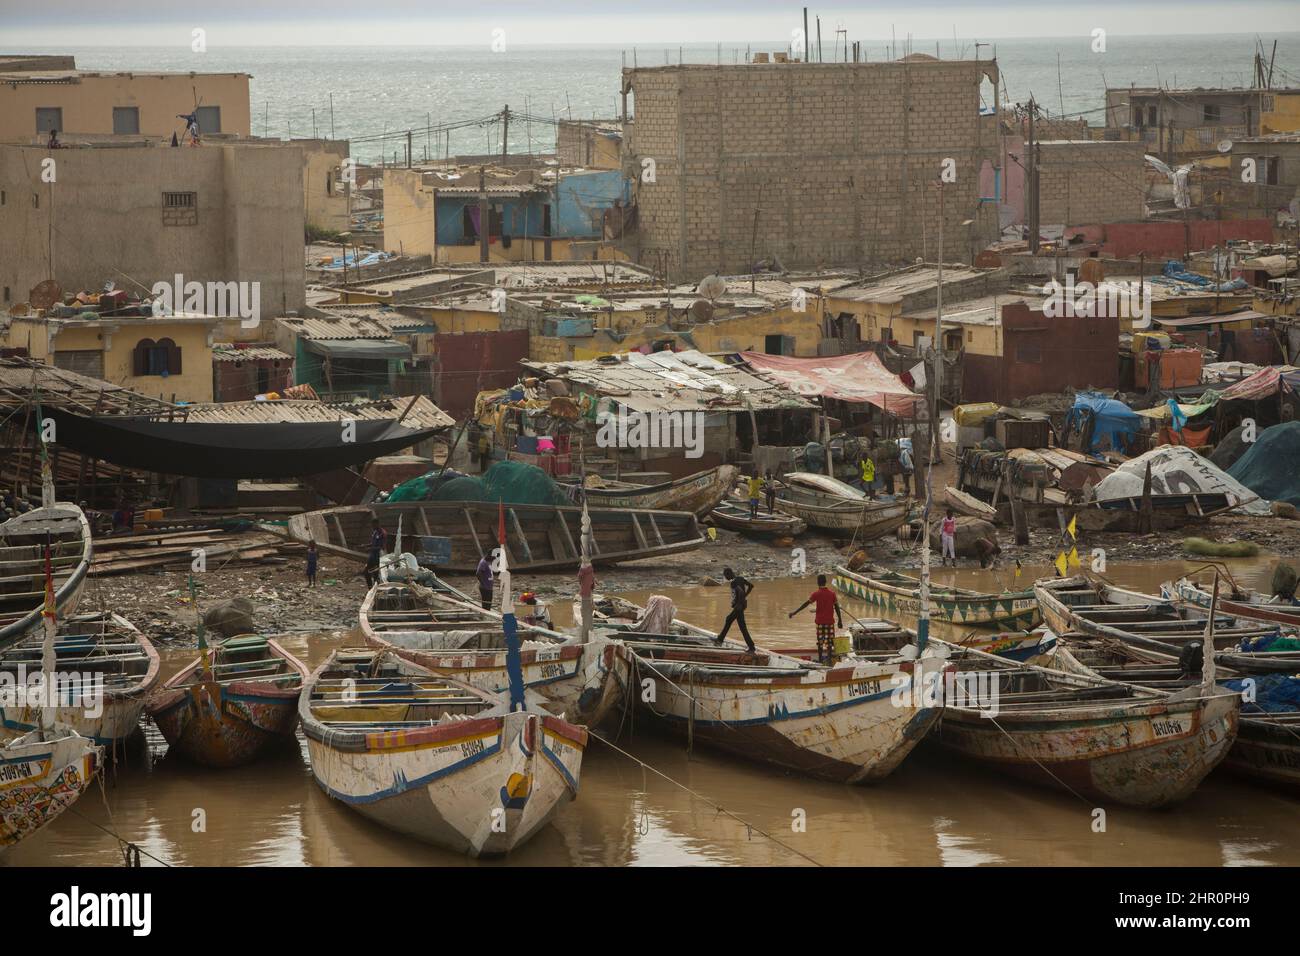 Pirogues dock along the coast of the Senegal River in Saint Louis, Senegal, West Africa. Stock Photo